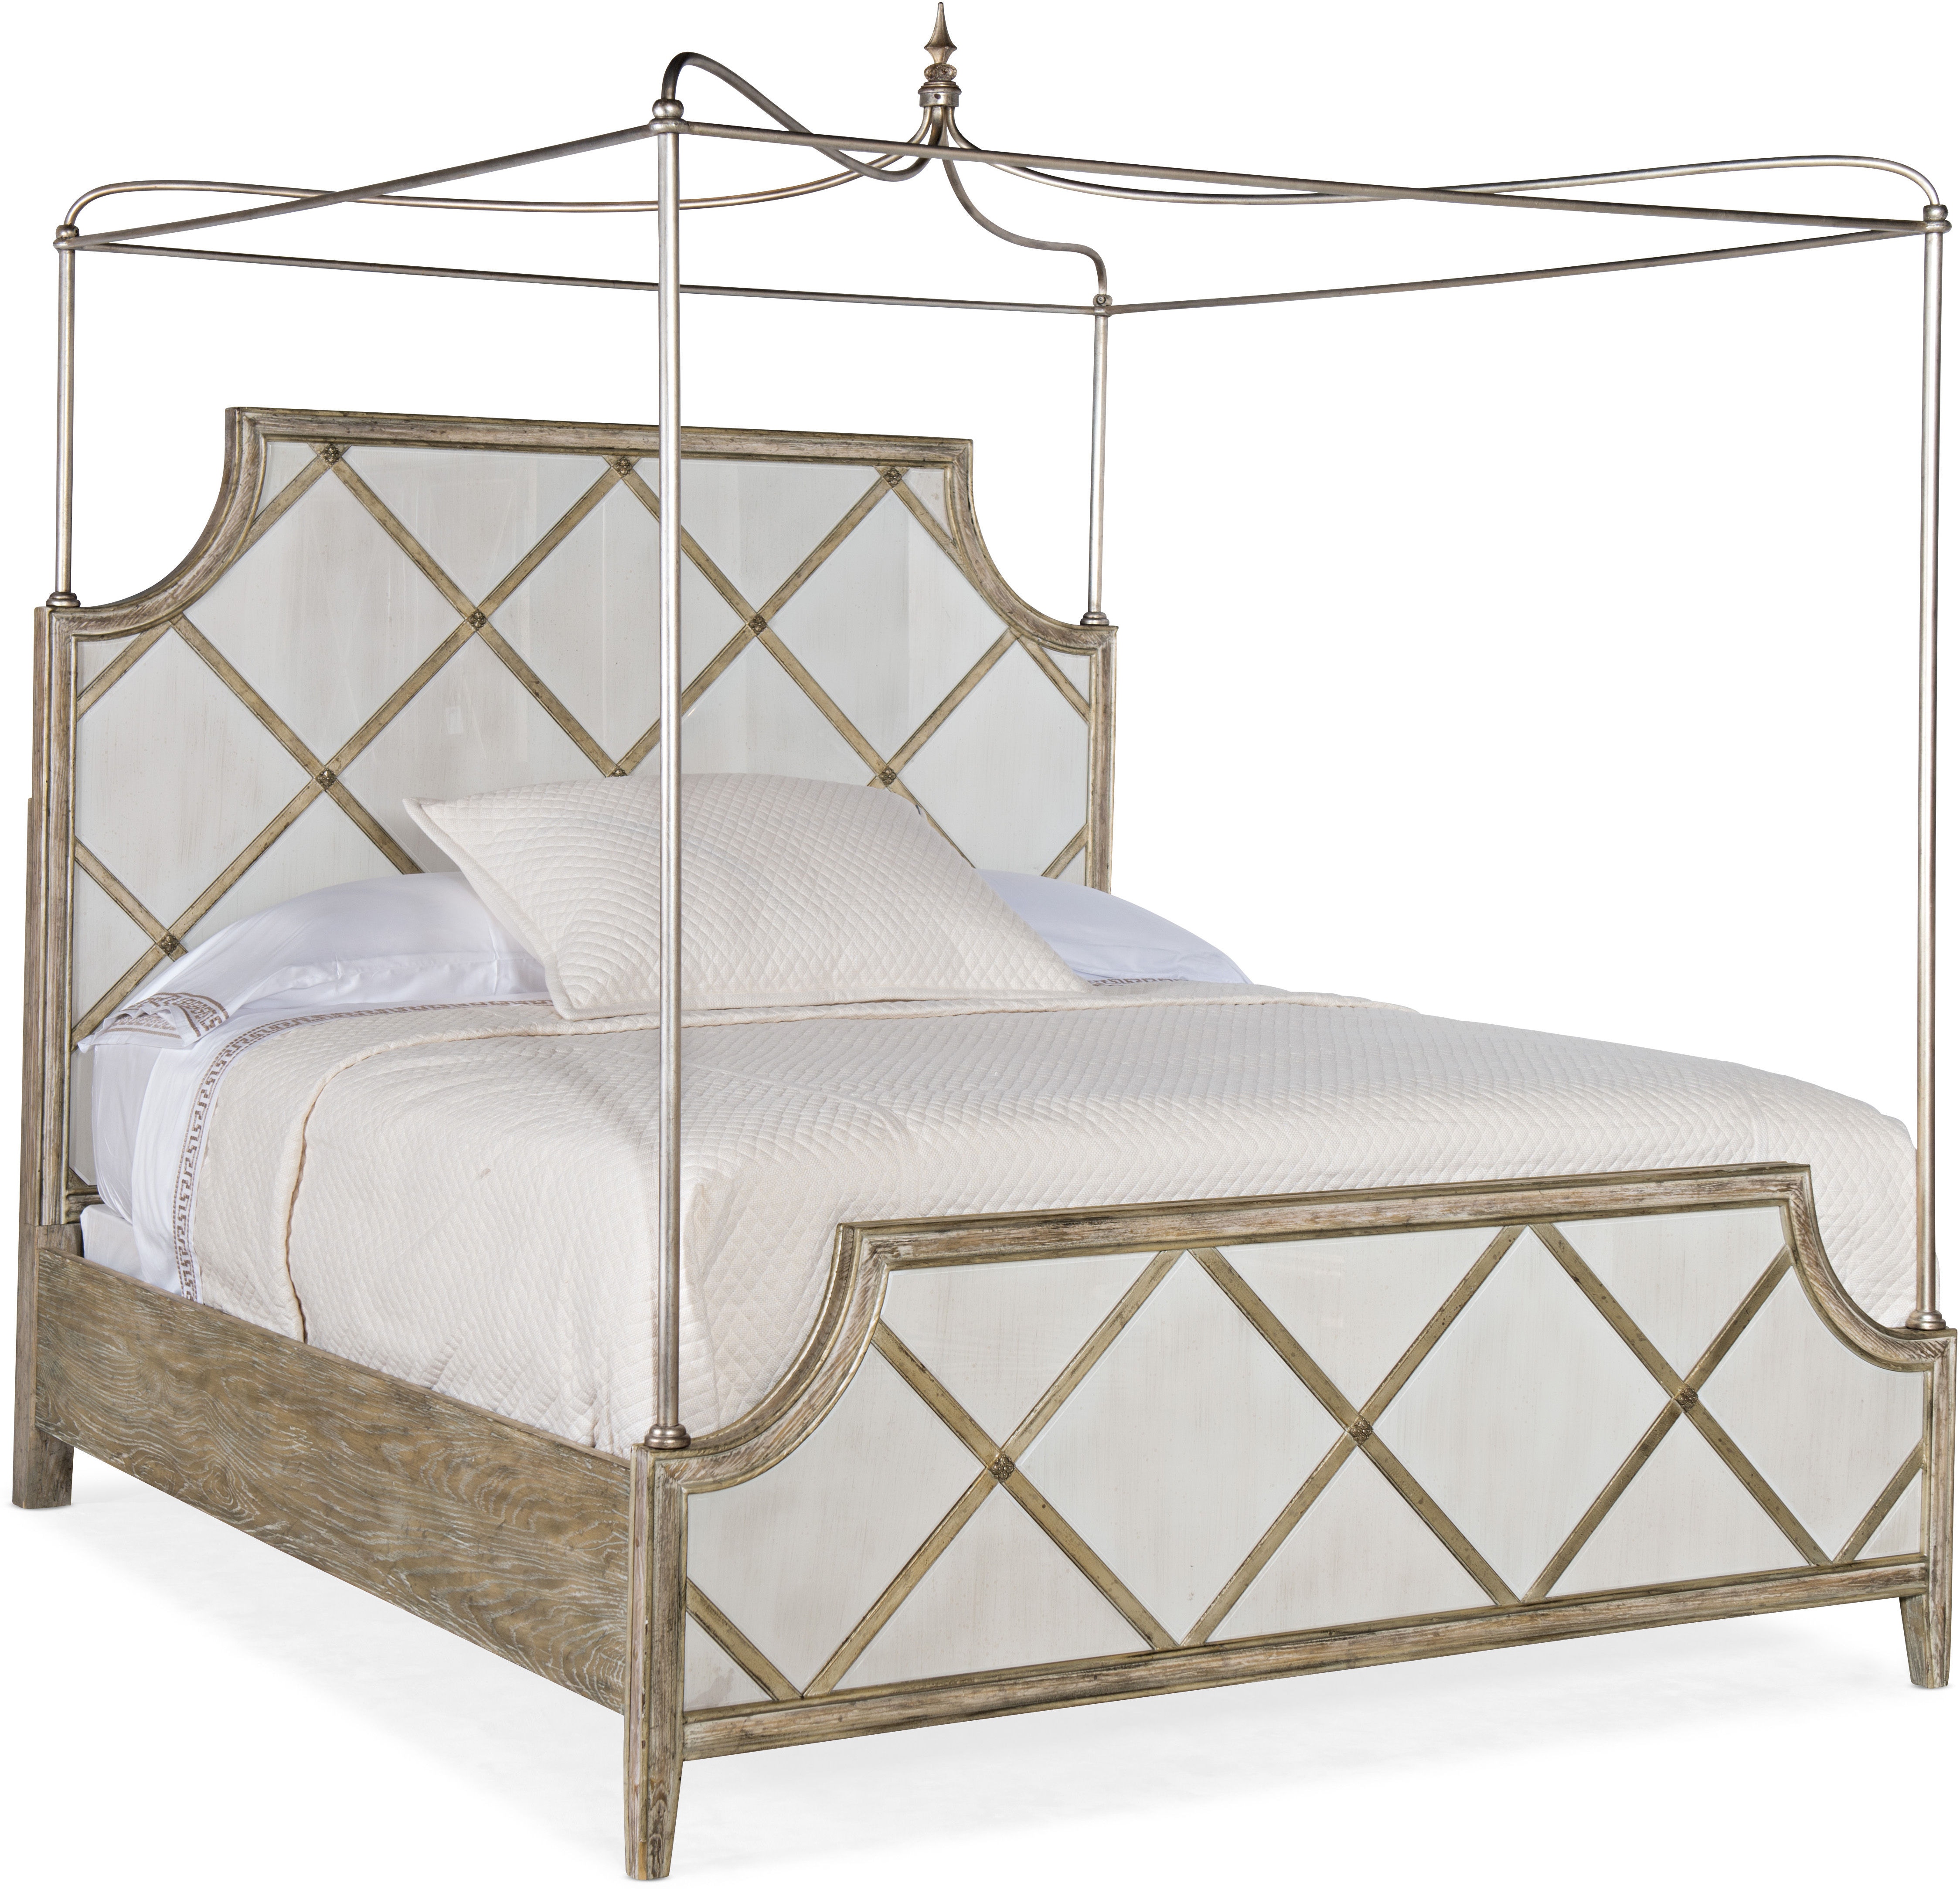 Hooker Furniture Diamont California King Canopy Panel Bed